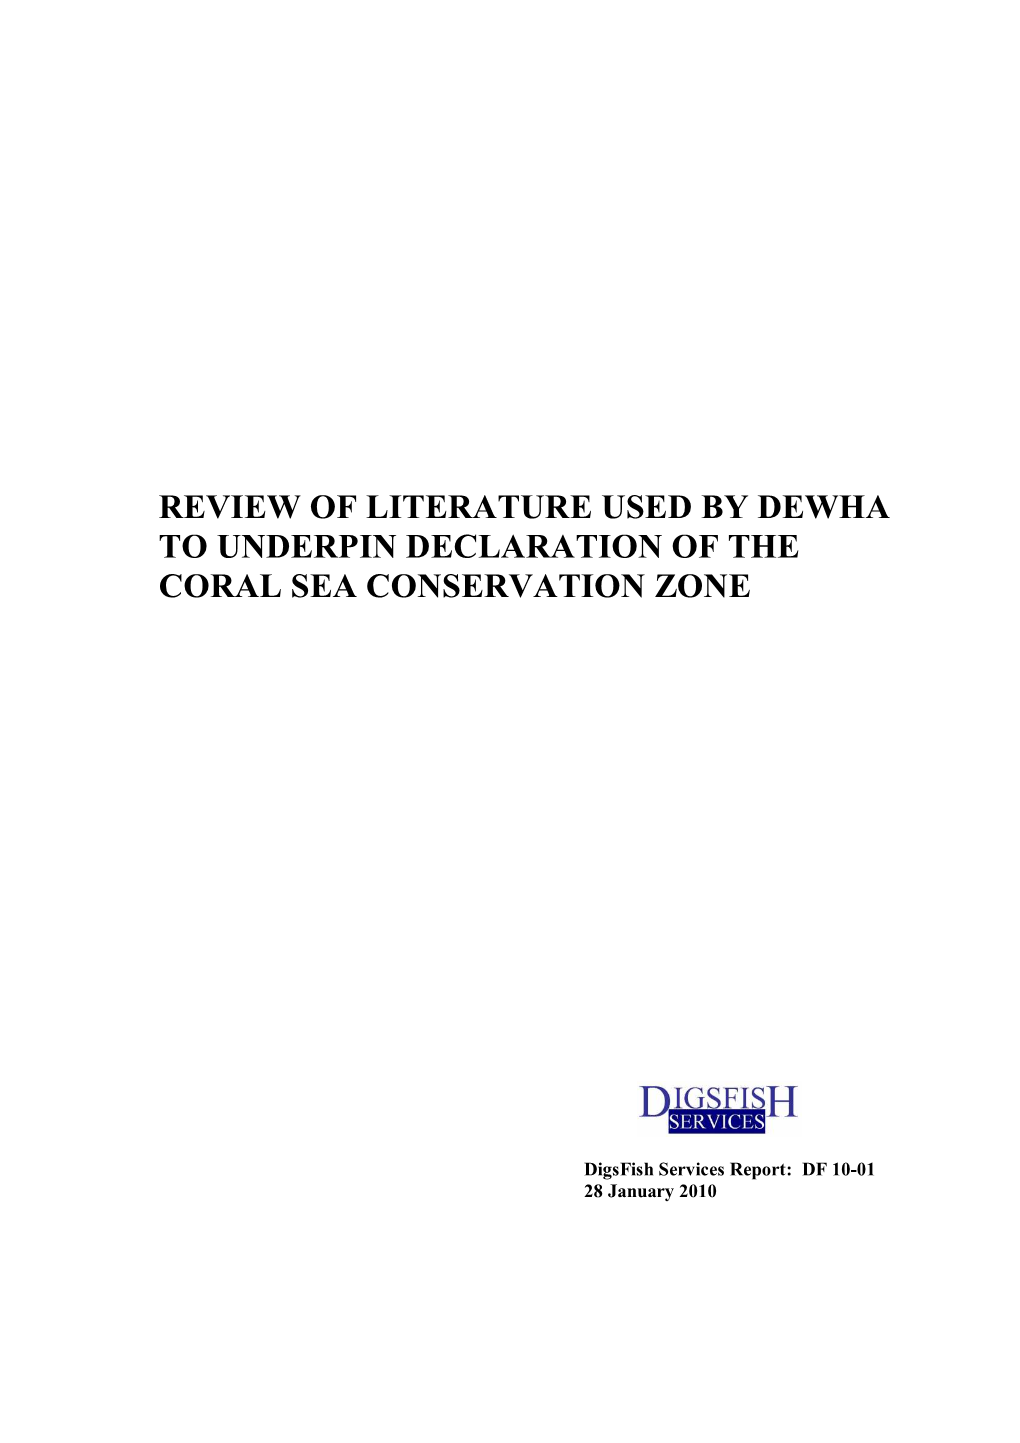 Review of Literature Used by Dewha to Underpin Declaration of the Coral Sea Conservation Zone